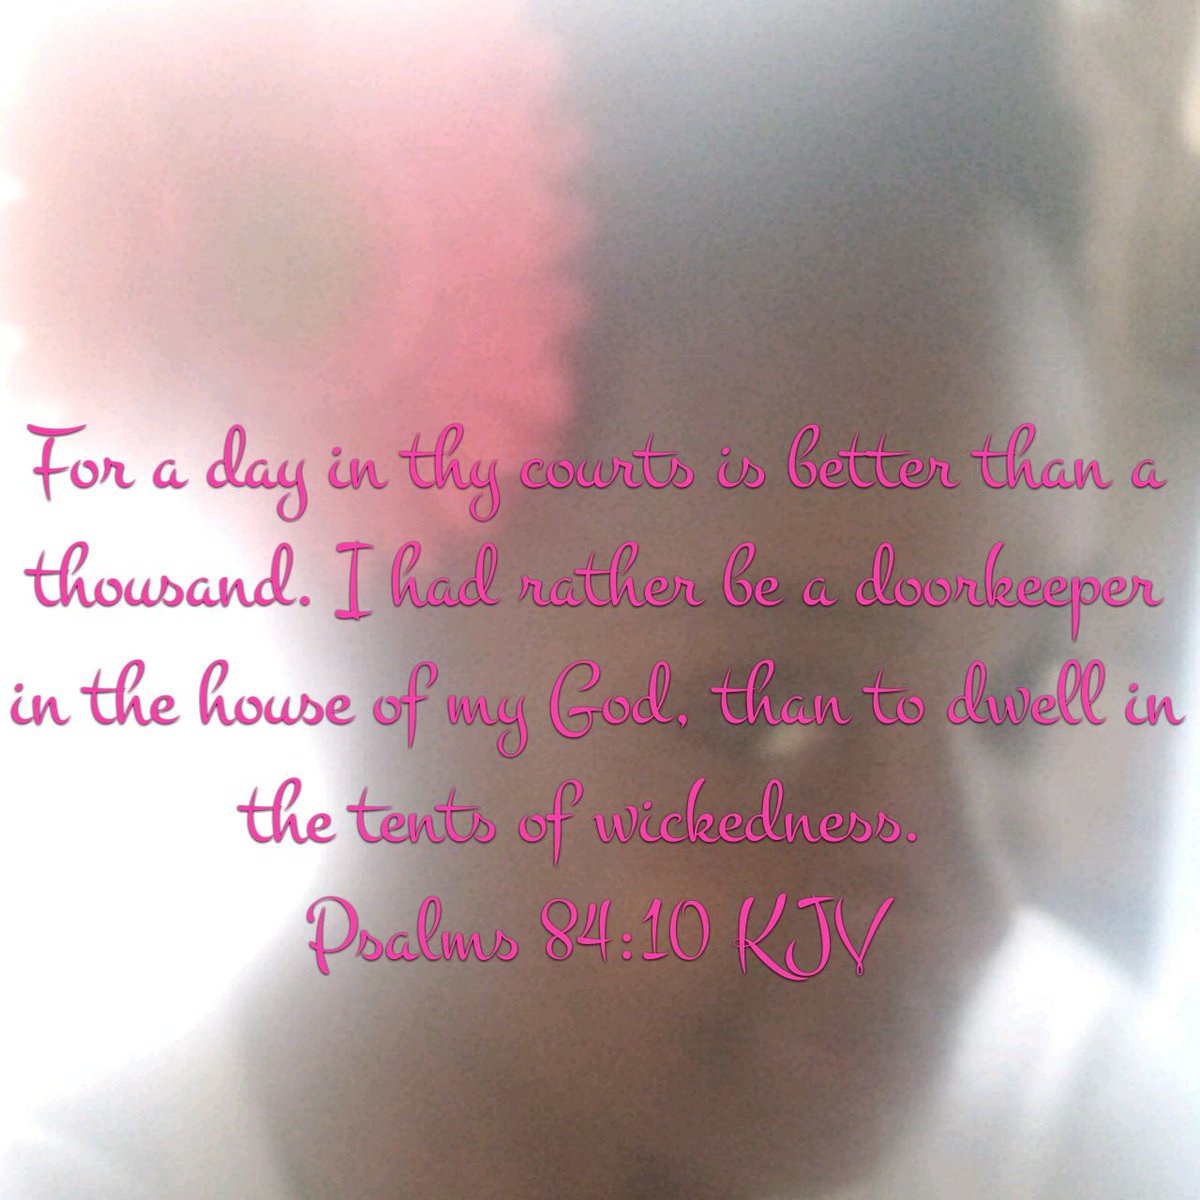 #HappySabbath #TheGreatRedeemer #SaturdayMotivation #BibleVerses
KJV Psalms 84
10 For a day in thy courts is better than a thousand. I had rather be a doorkeeper in the house of my God, than to dwell in the tents of wickedness.